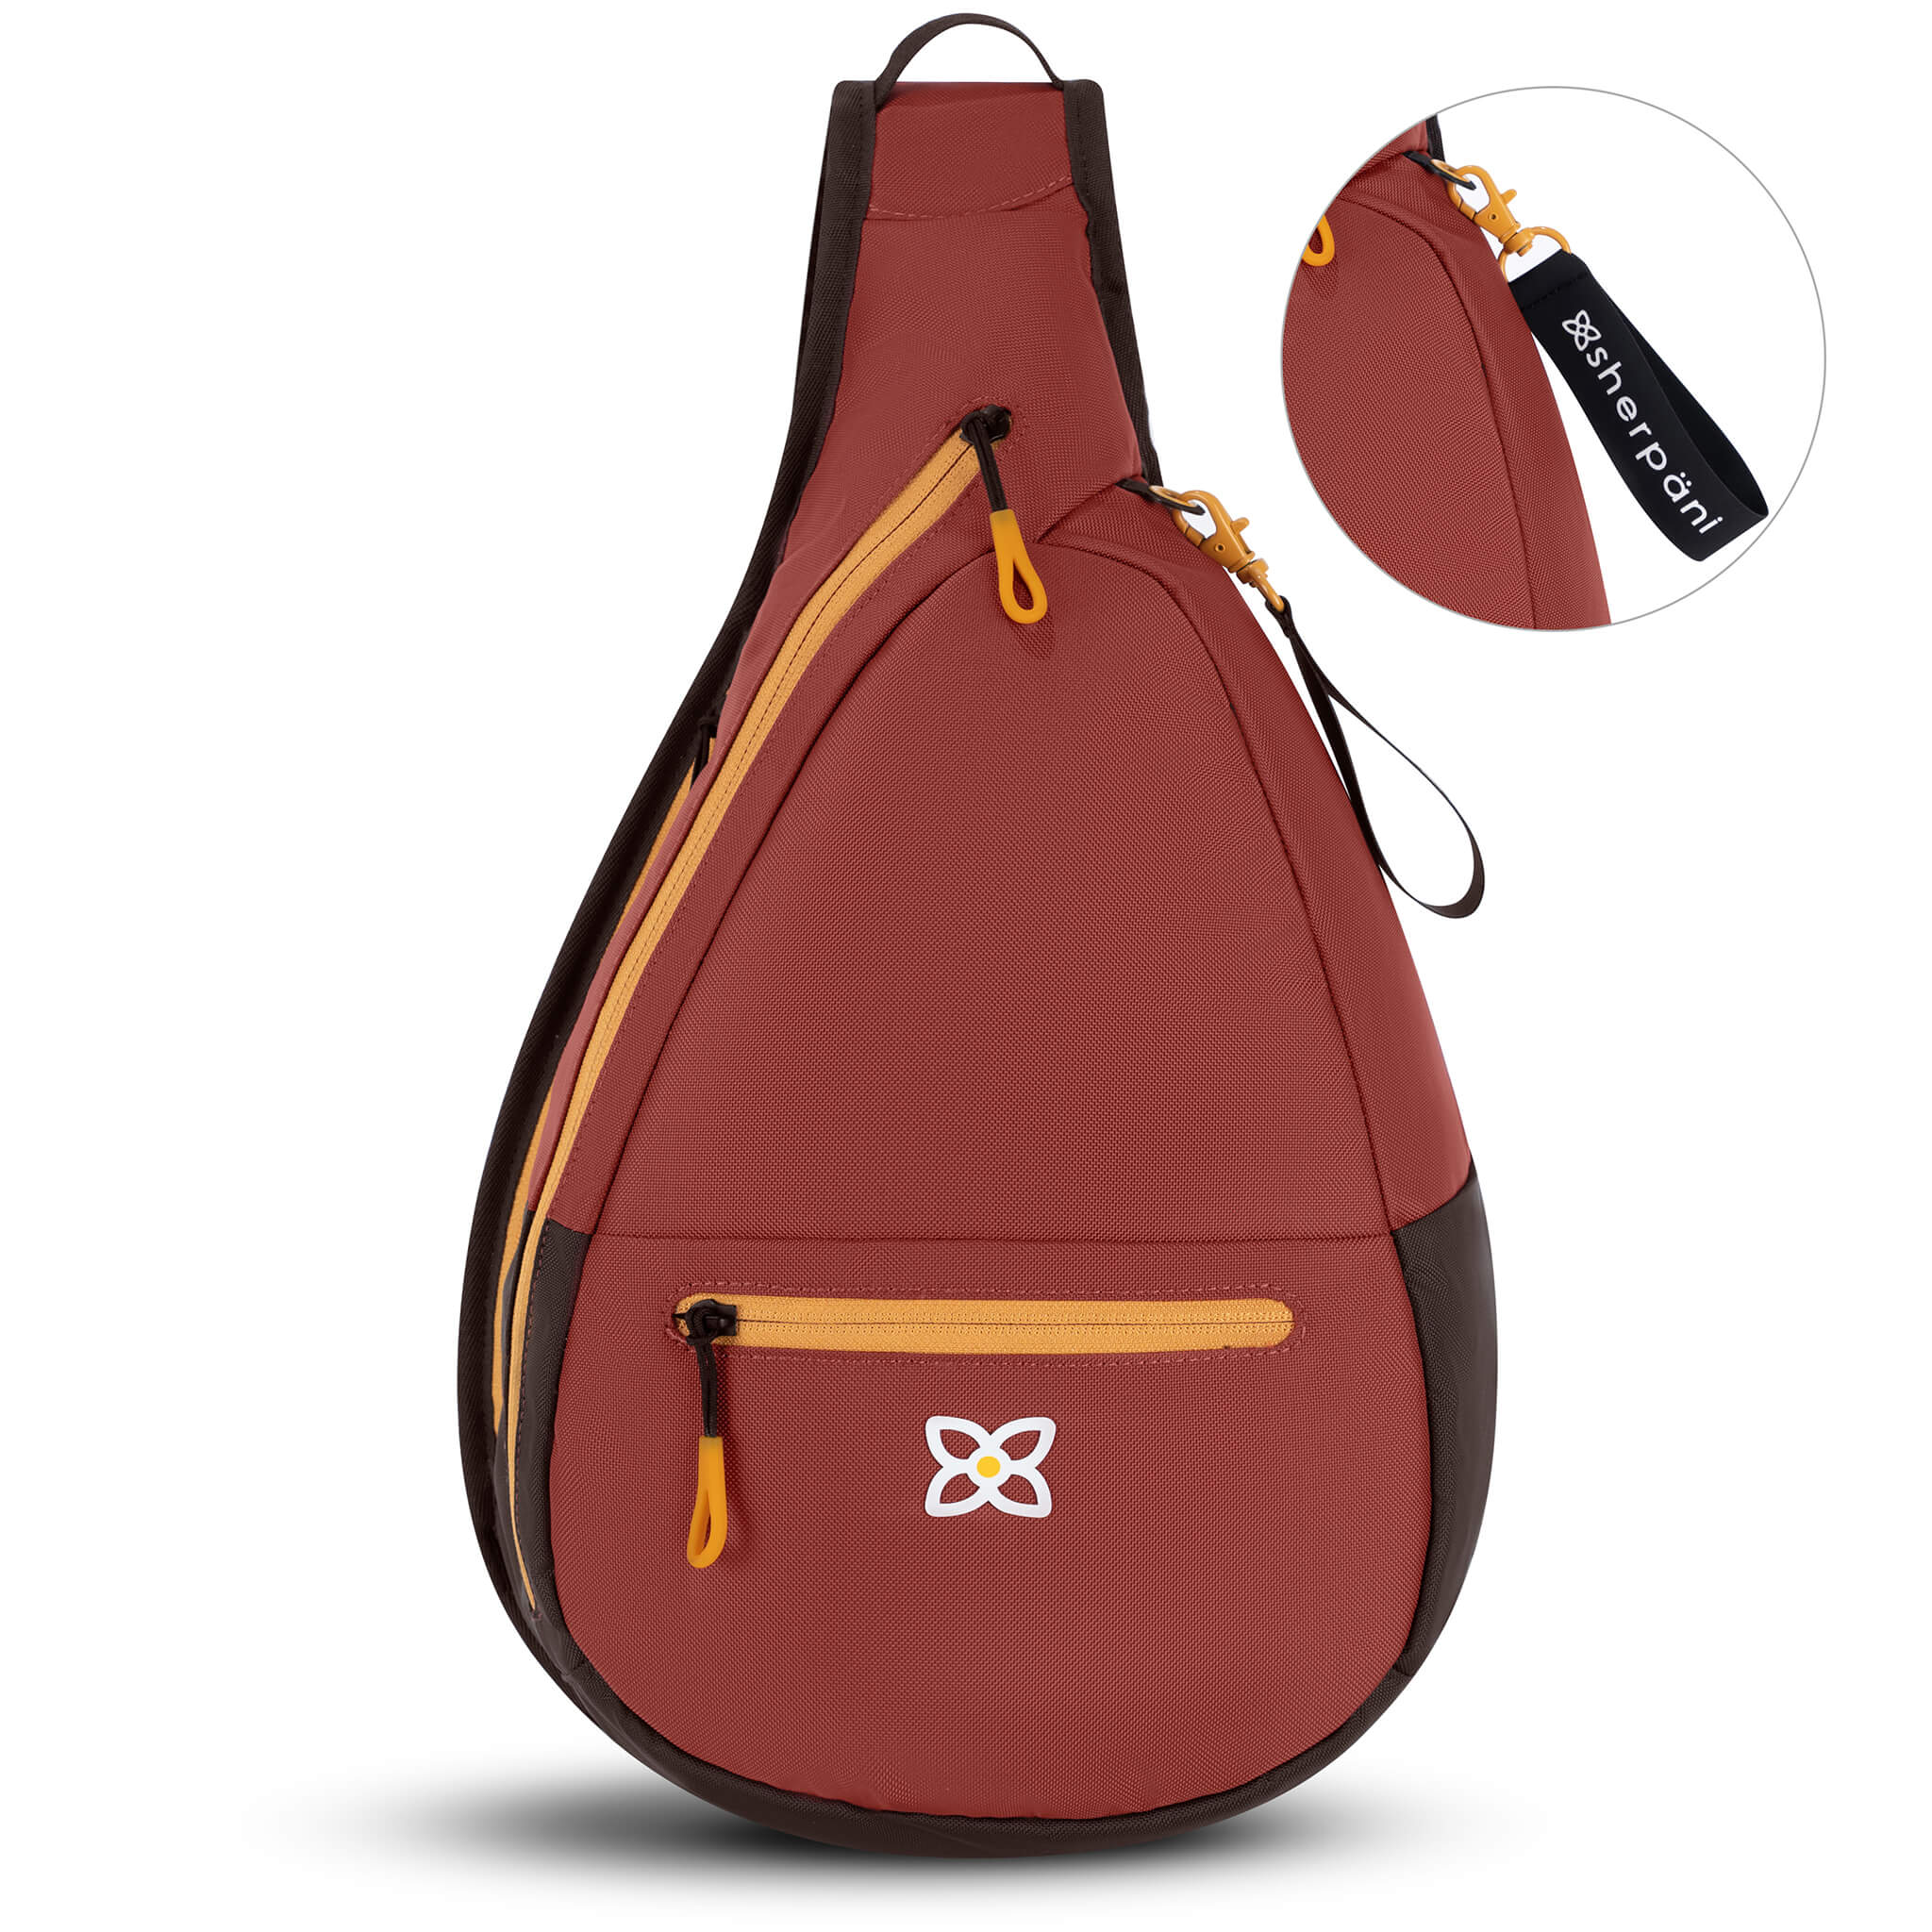 Flat front view of Sherpani sling backpack for women, the Esprit in Cider. Esprit features include front zipper pocket, side zipper pocket, inside mesh pocket, RFID blocking, detachable key chain and an adjustable sling strap. The Cider color is two-toned in burgundy and dark brown with yellow accents.